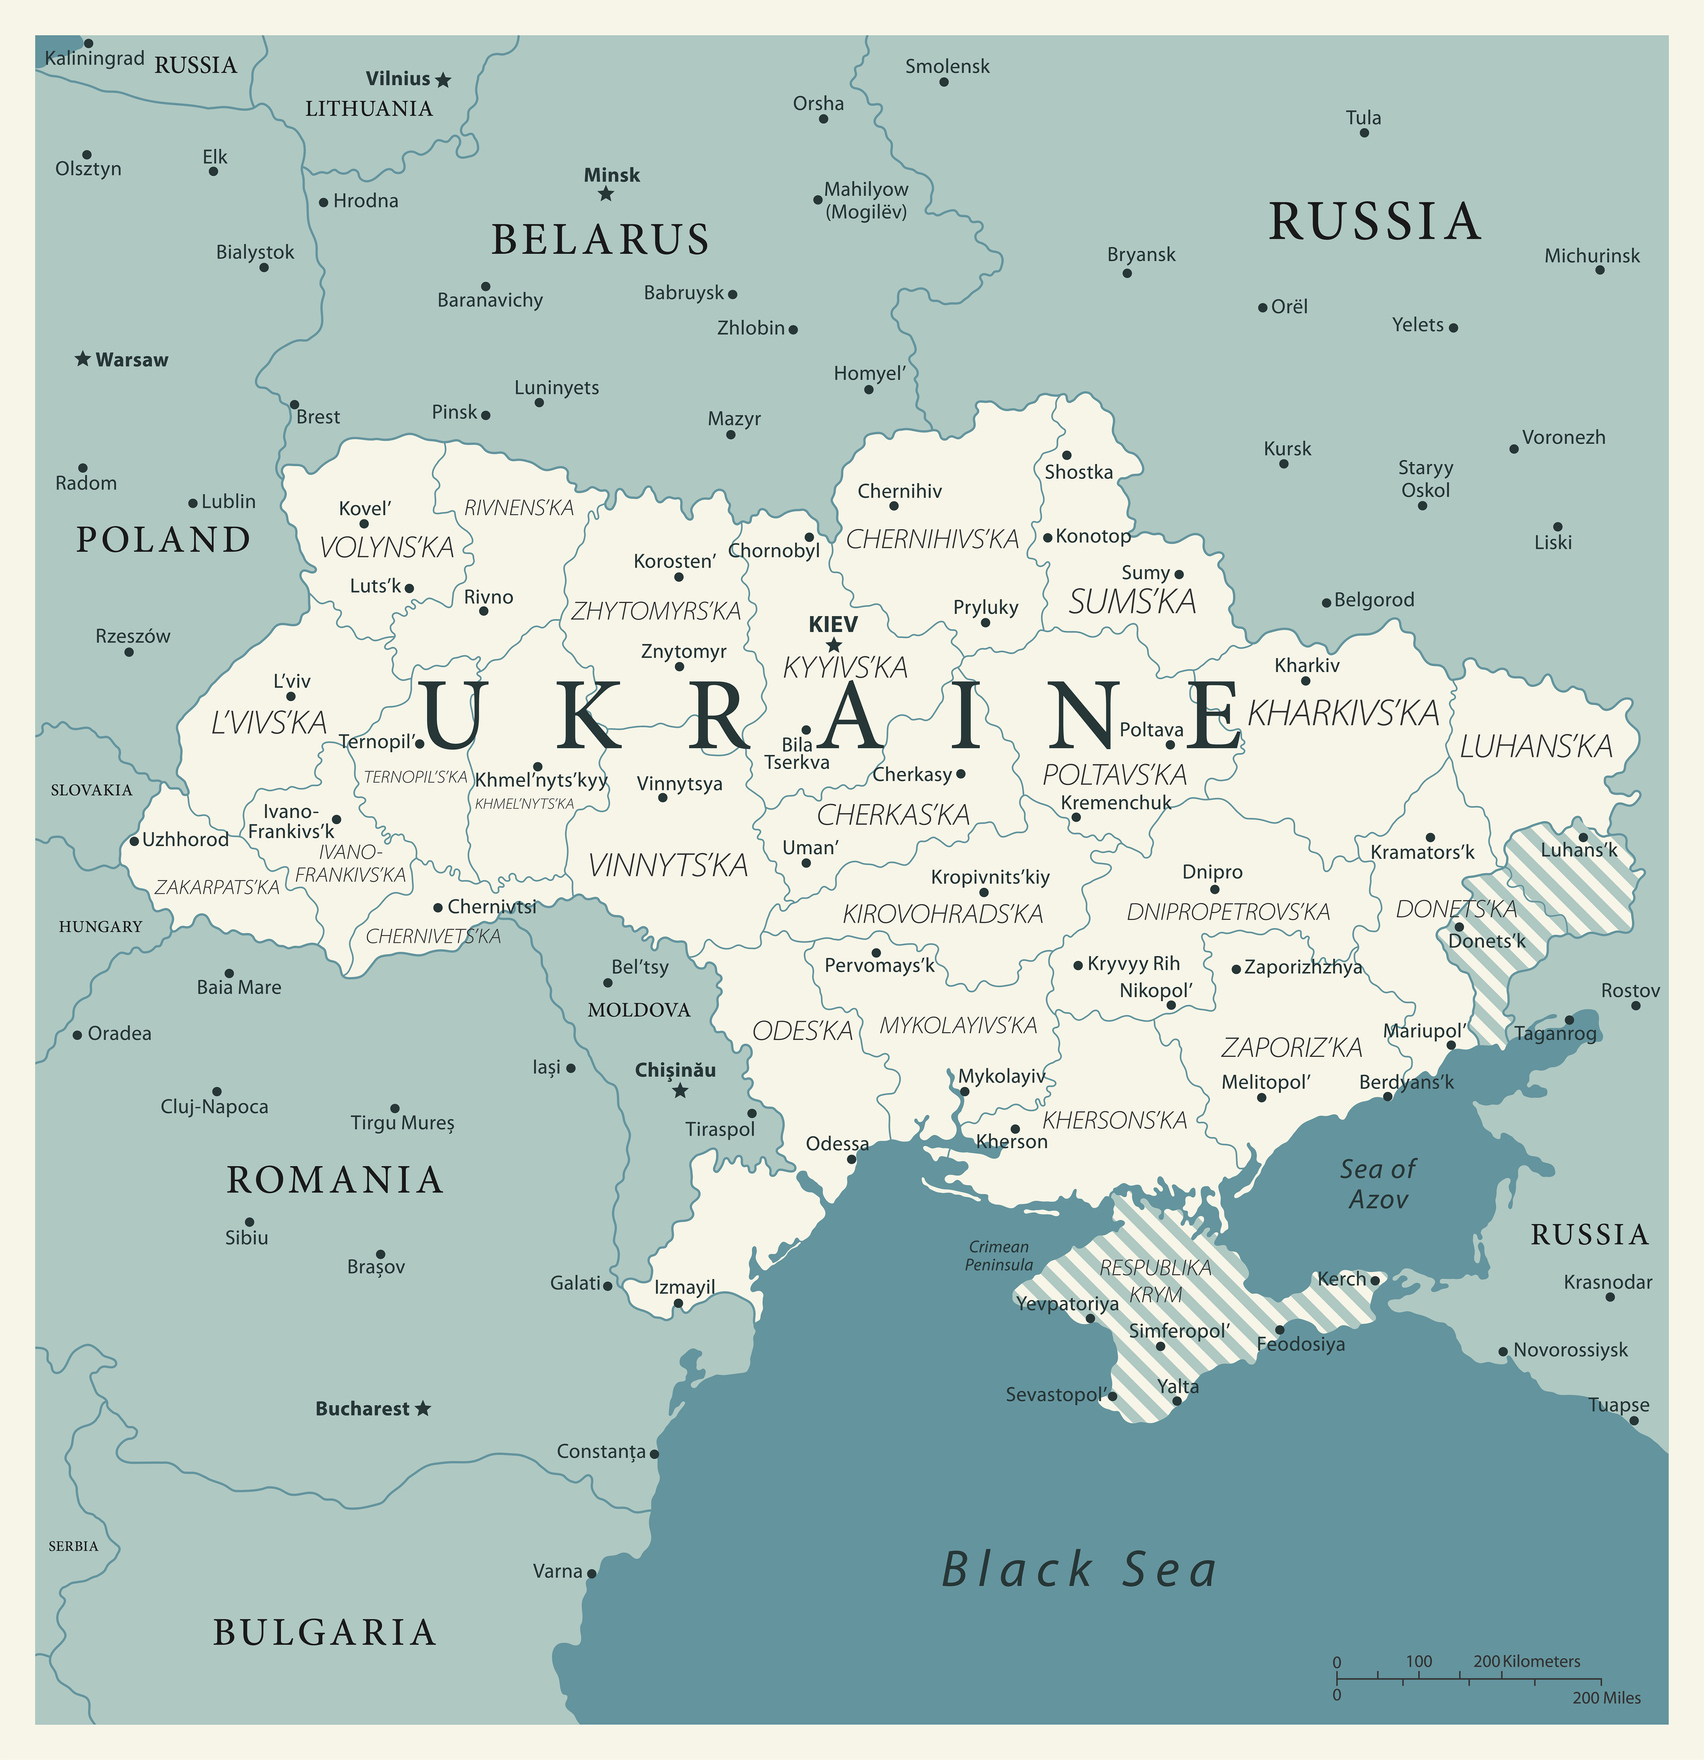 Map of Ukraine and surrounding areas, in which Ukraine is white and Crimea, Luhansk, and Donetsk are shaded.